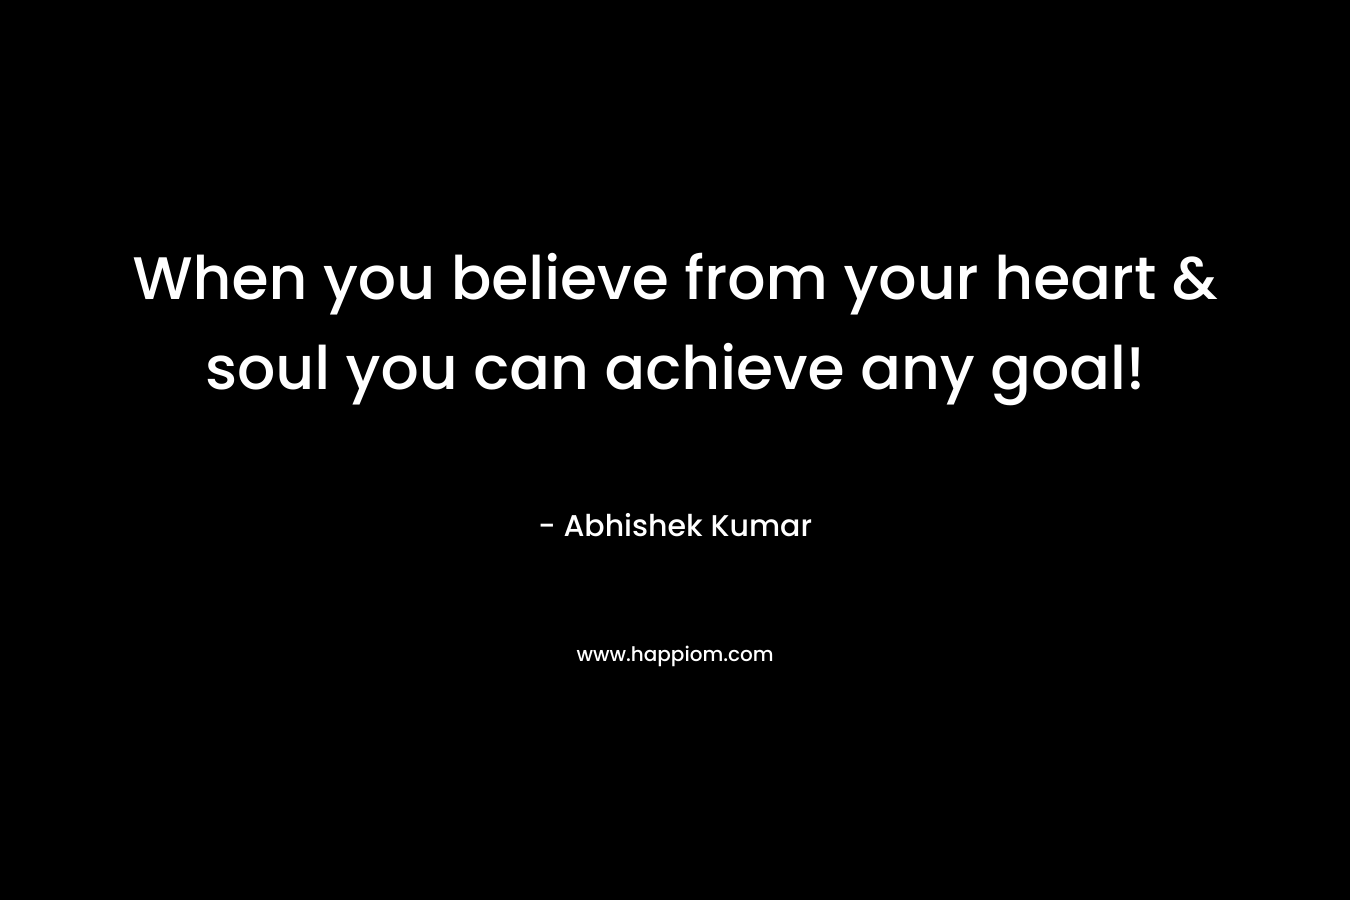 When you believe from your heart & soul you can achieve any goal!